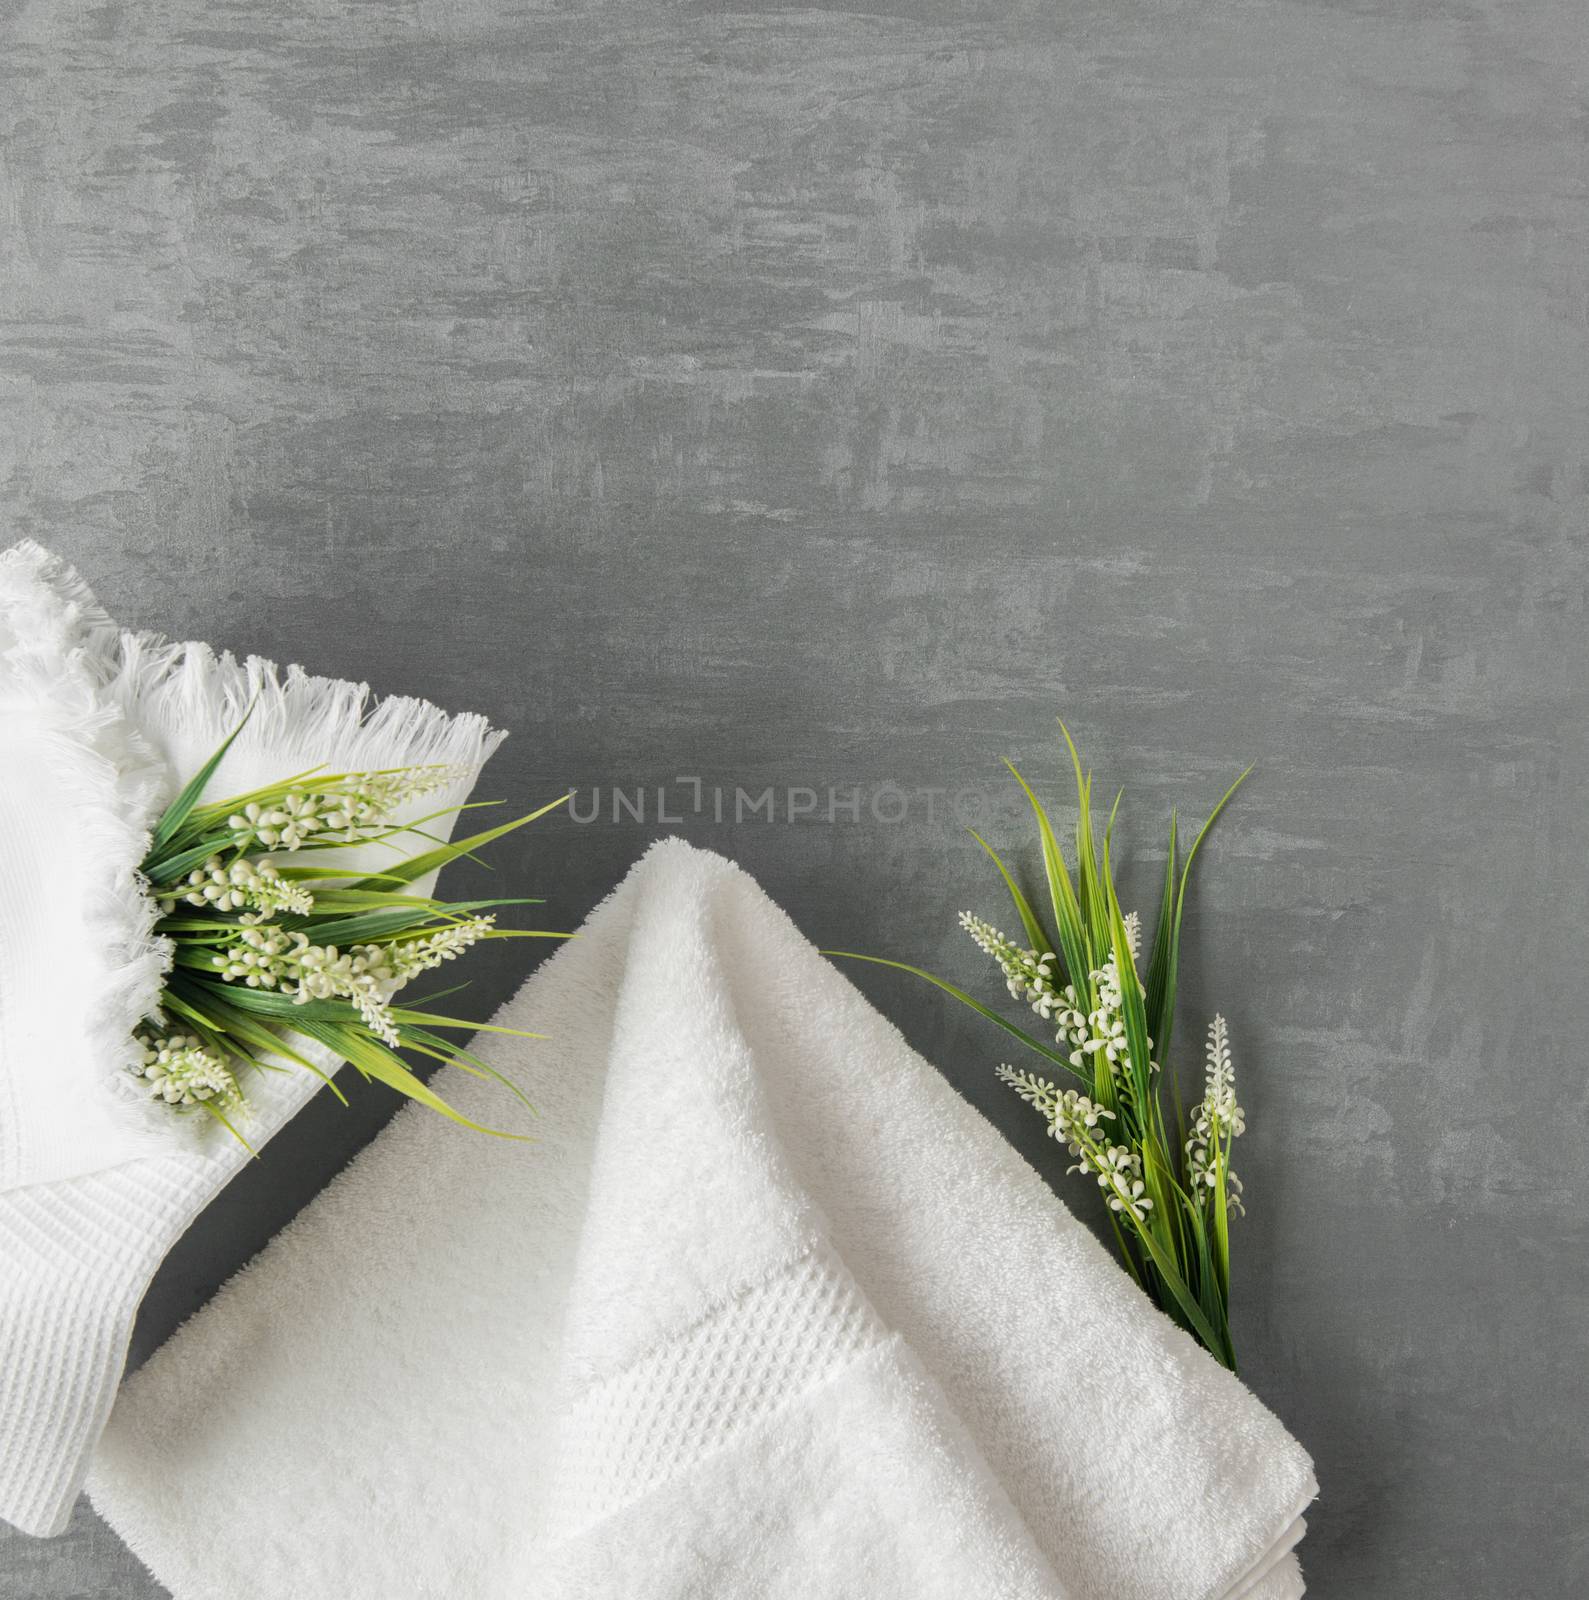 a towel on gray background by A_Karim